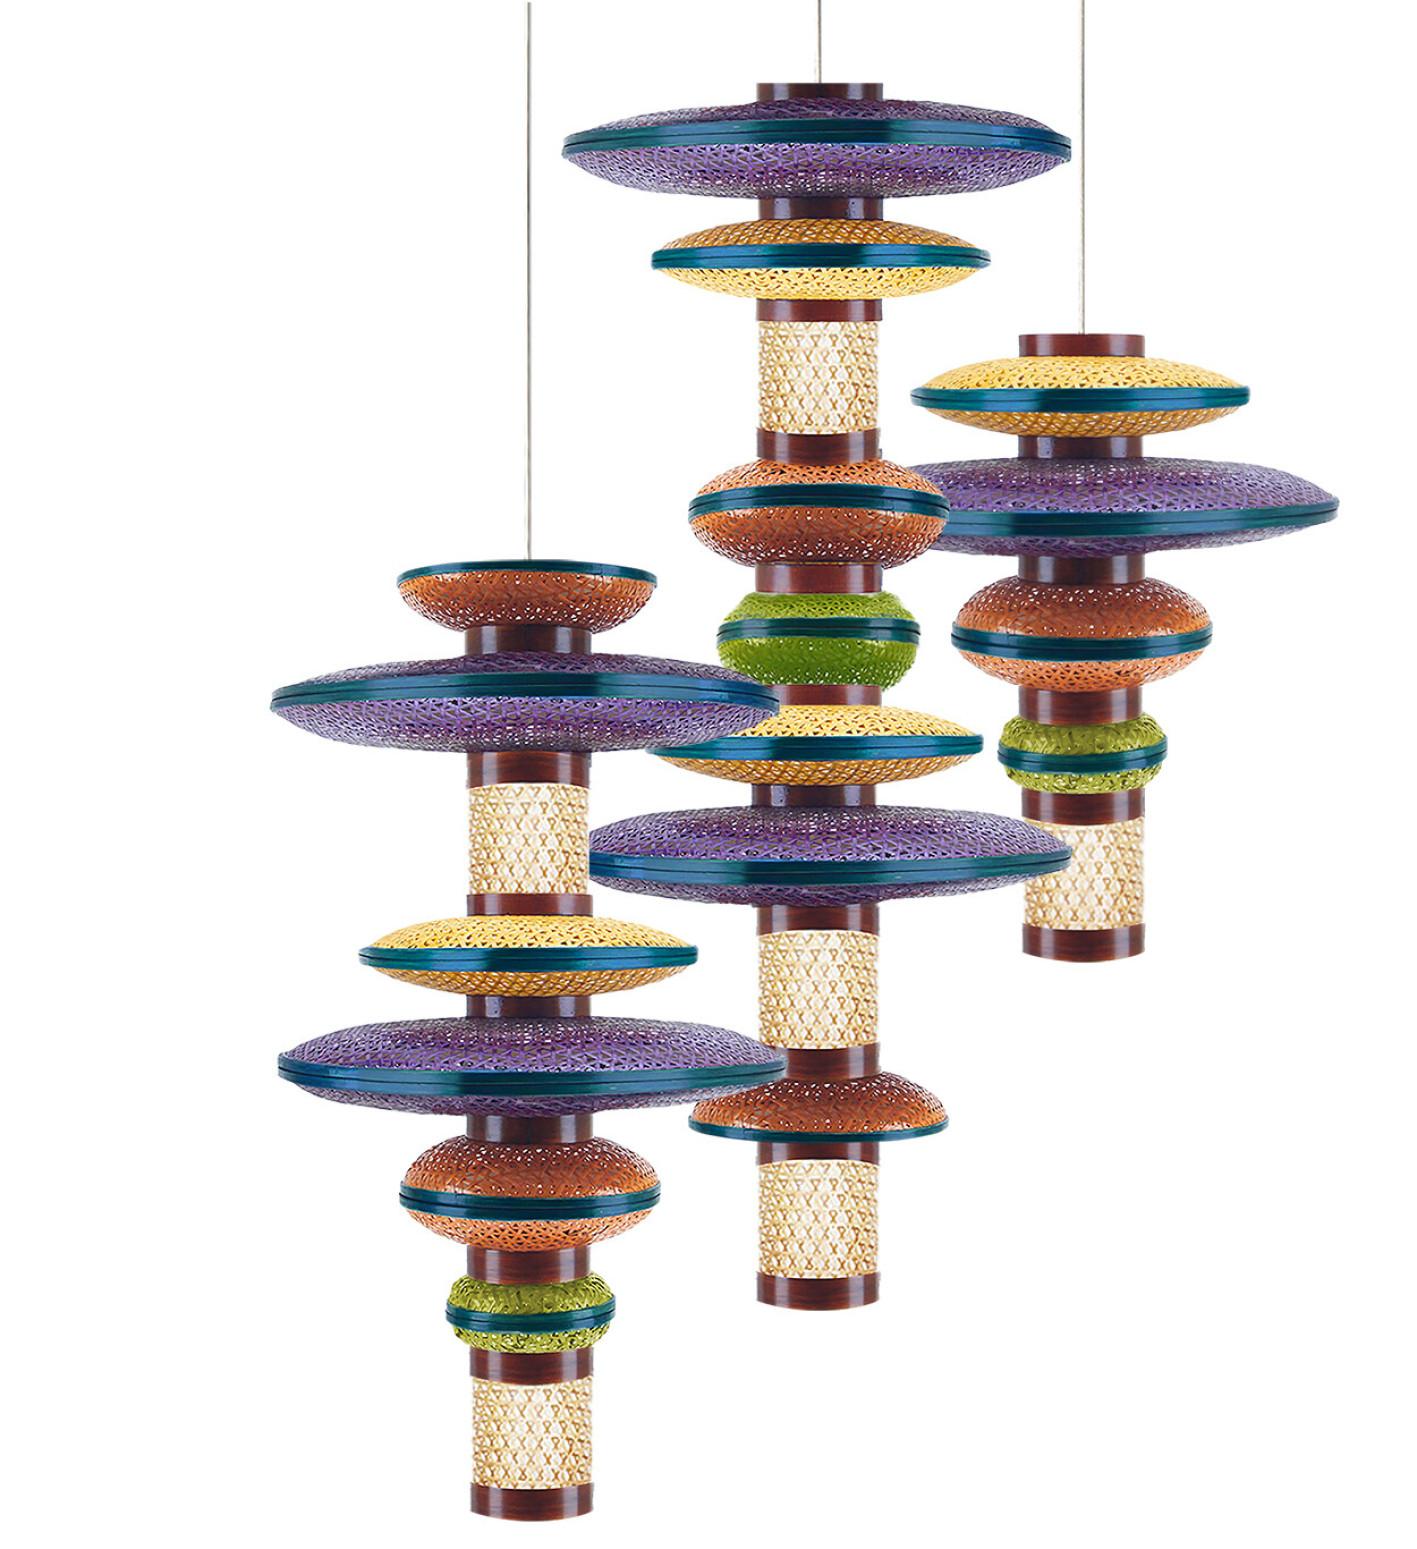 The playful ‘multi color'  Bamboo Chandelier’ brings traditional and ancient bamboo weaving into the modern interior space, showing the visual identity and functionality of this fascinating material. The modular bamboo woven chandelier is inspired